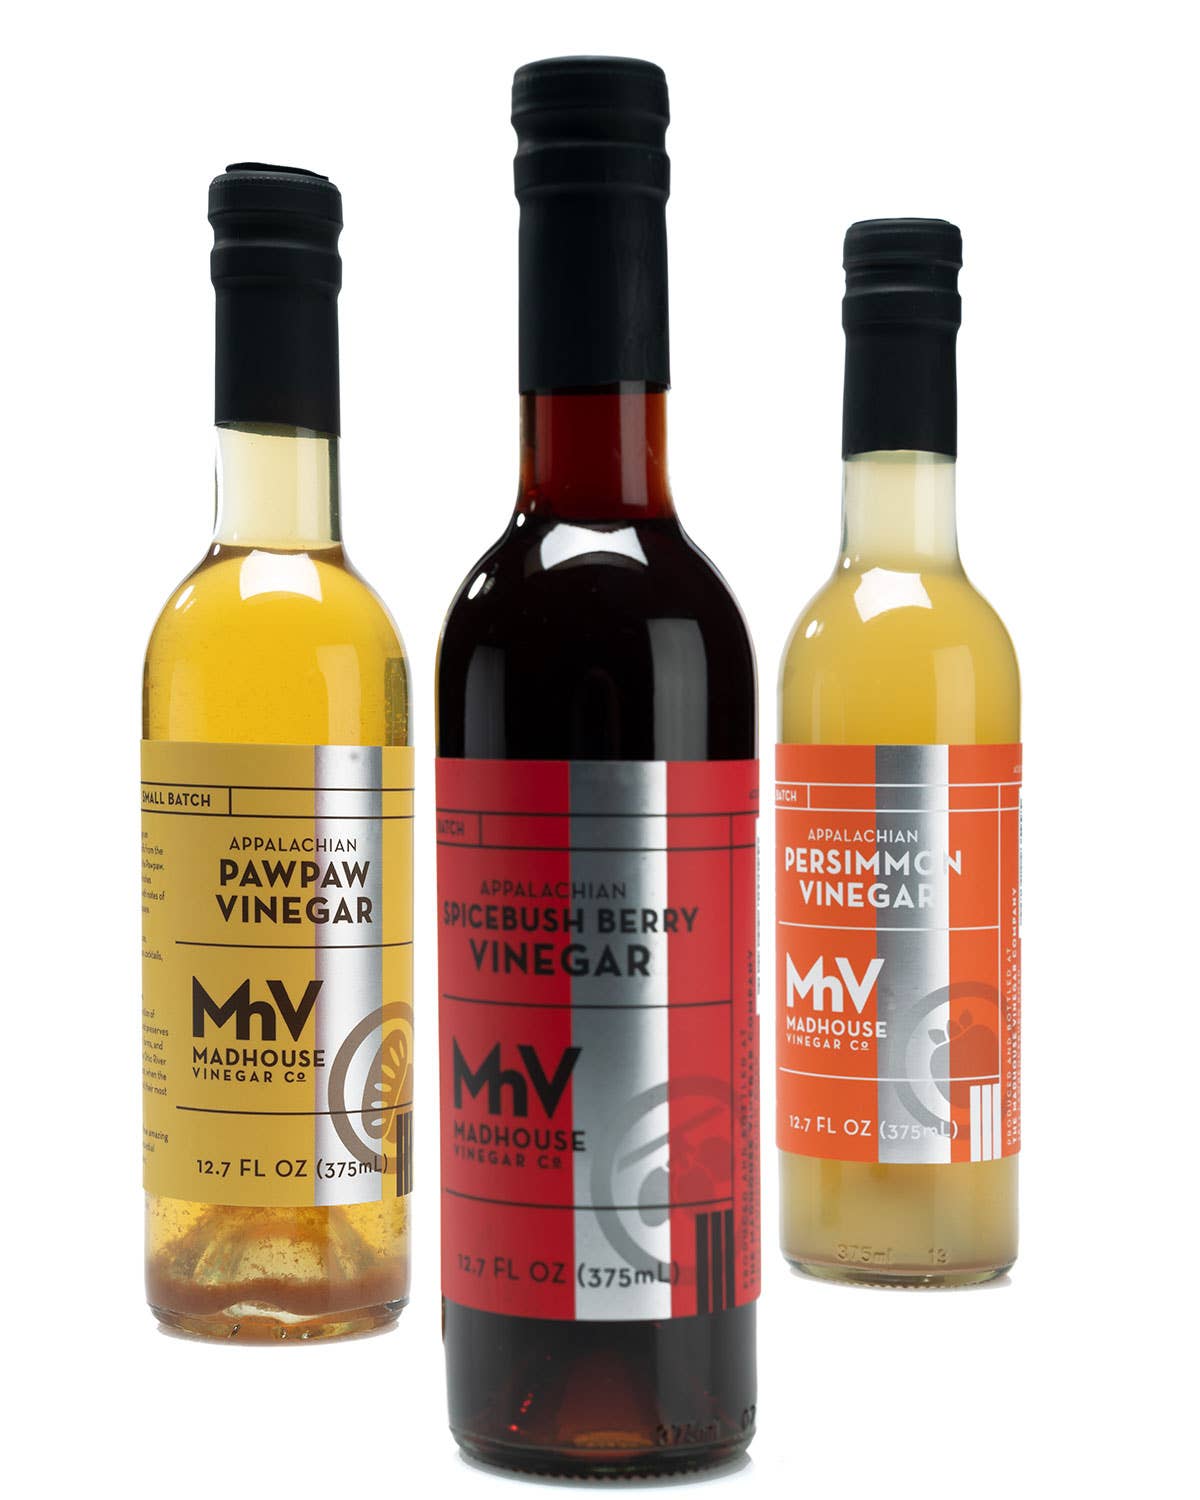 When Food Waste Turns Sour, MadHouse Vinegar Co. Takes Over